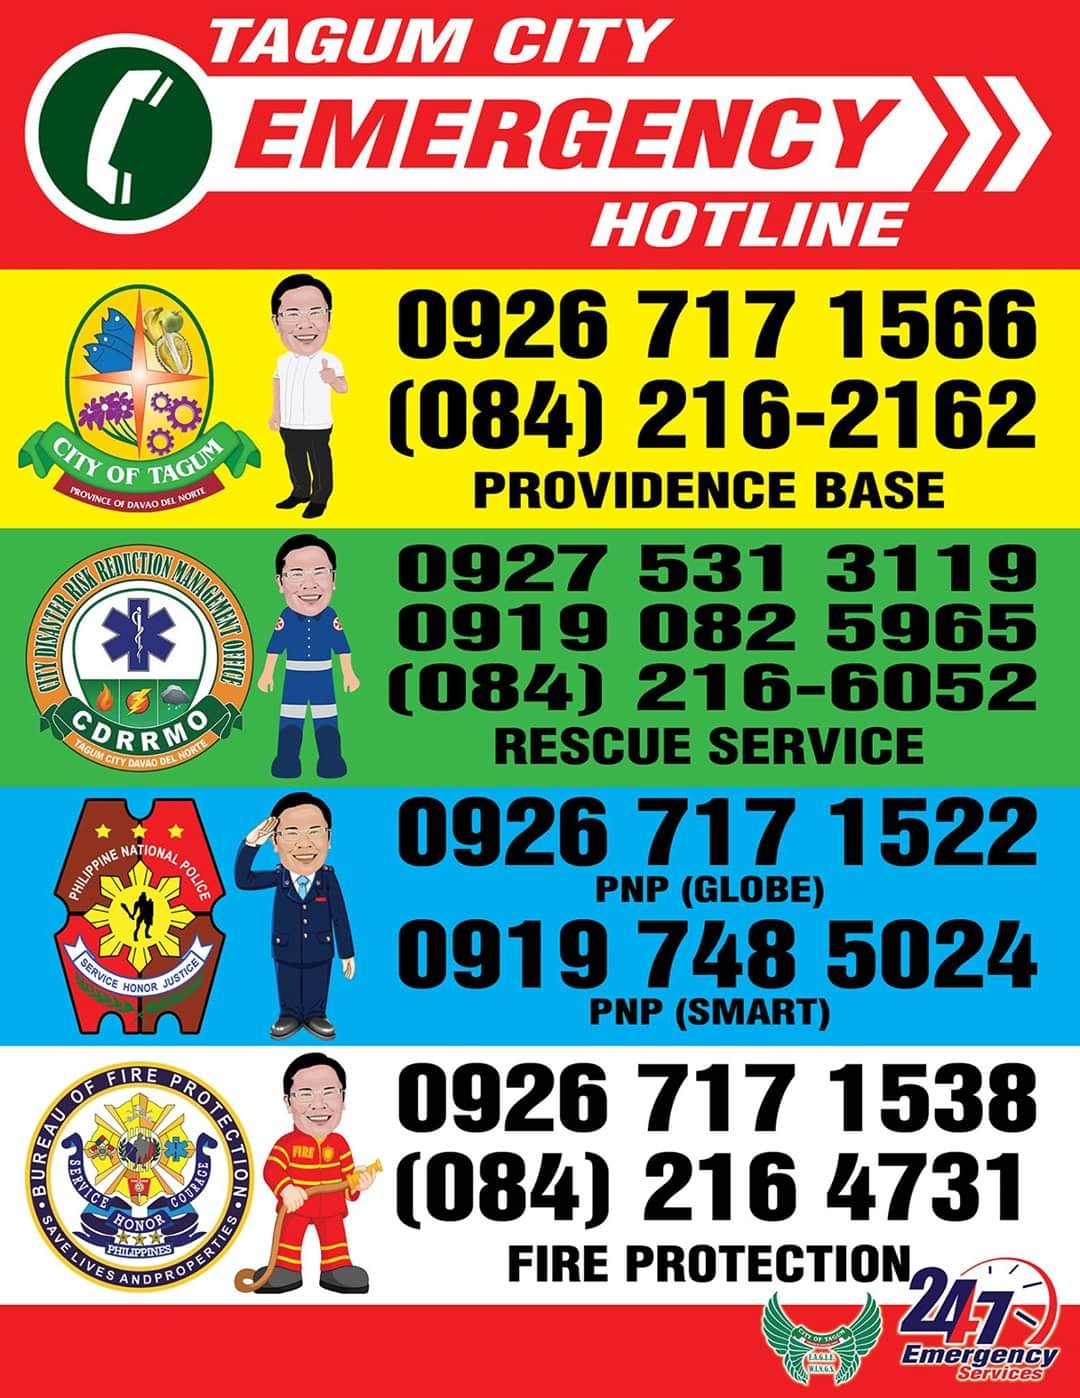 You are currently viewing Emergency Hotline Numbers – Tagum City